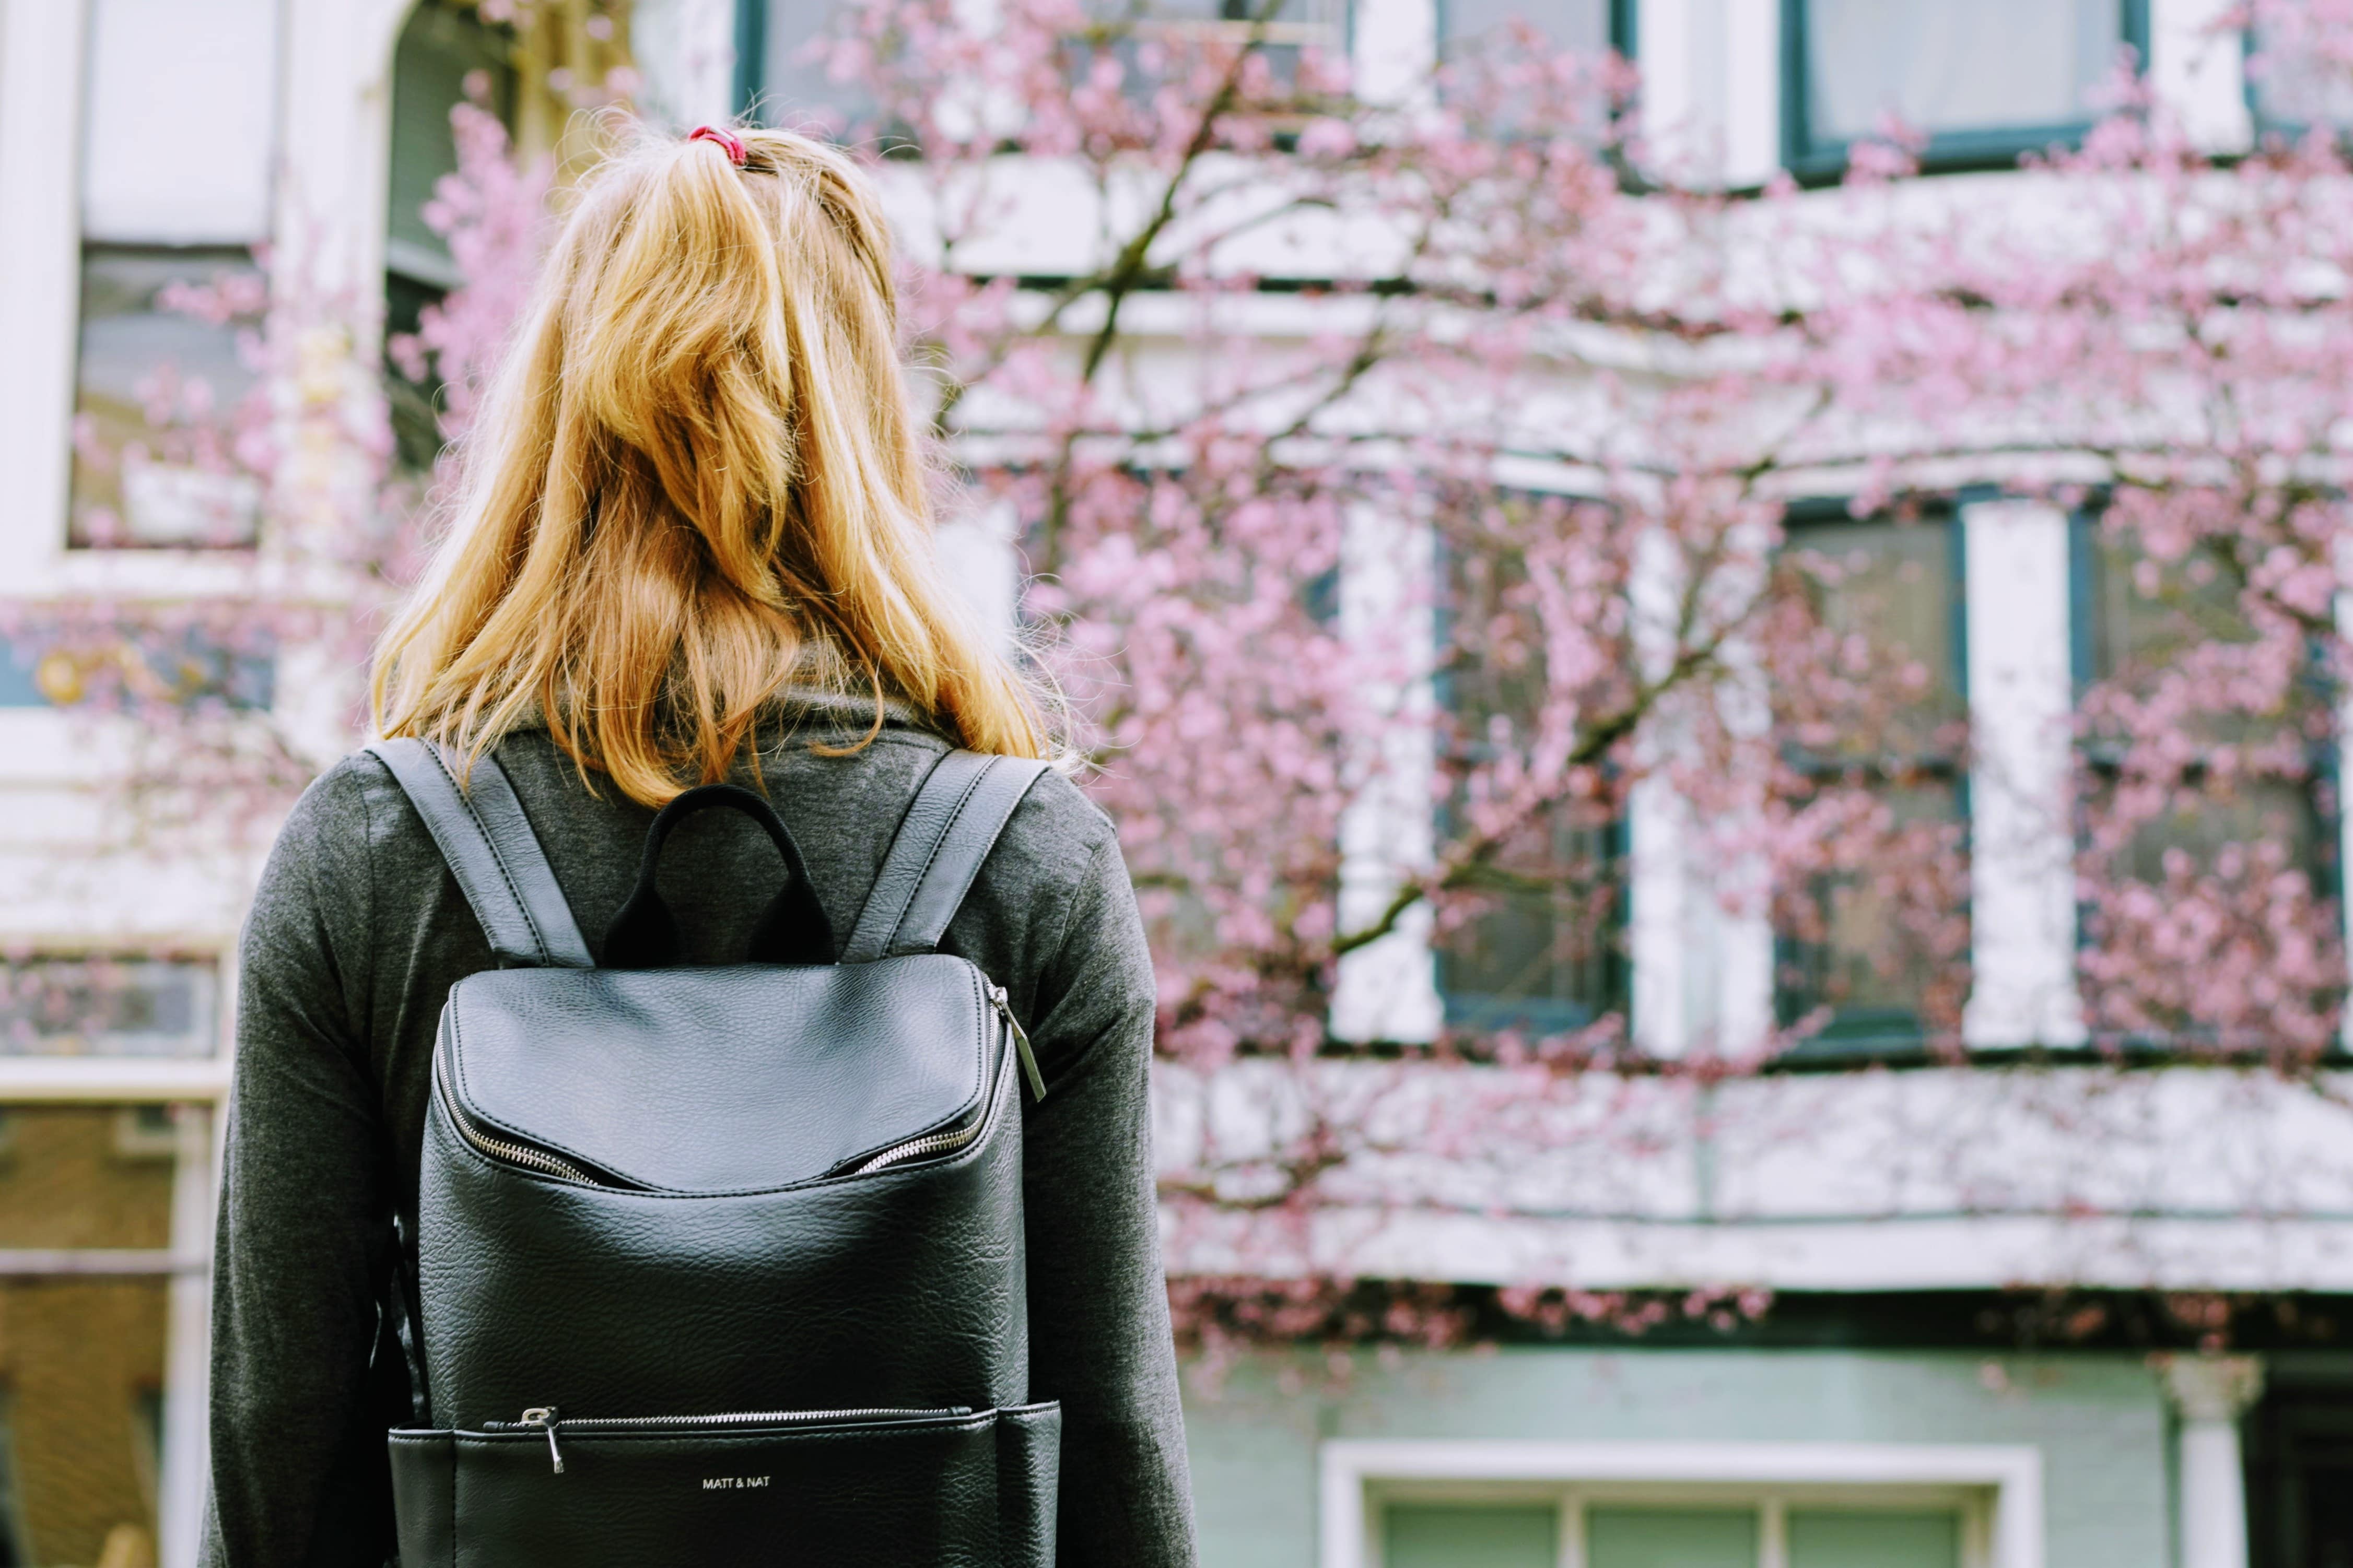 A woman is wearing a backpack and facing a cherry blossom tree.